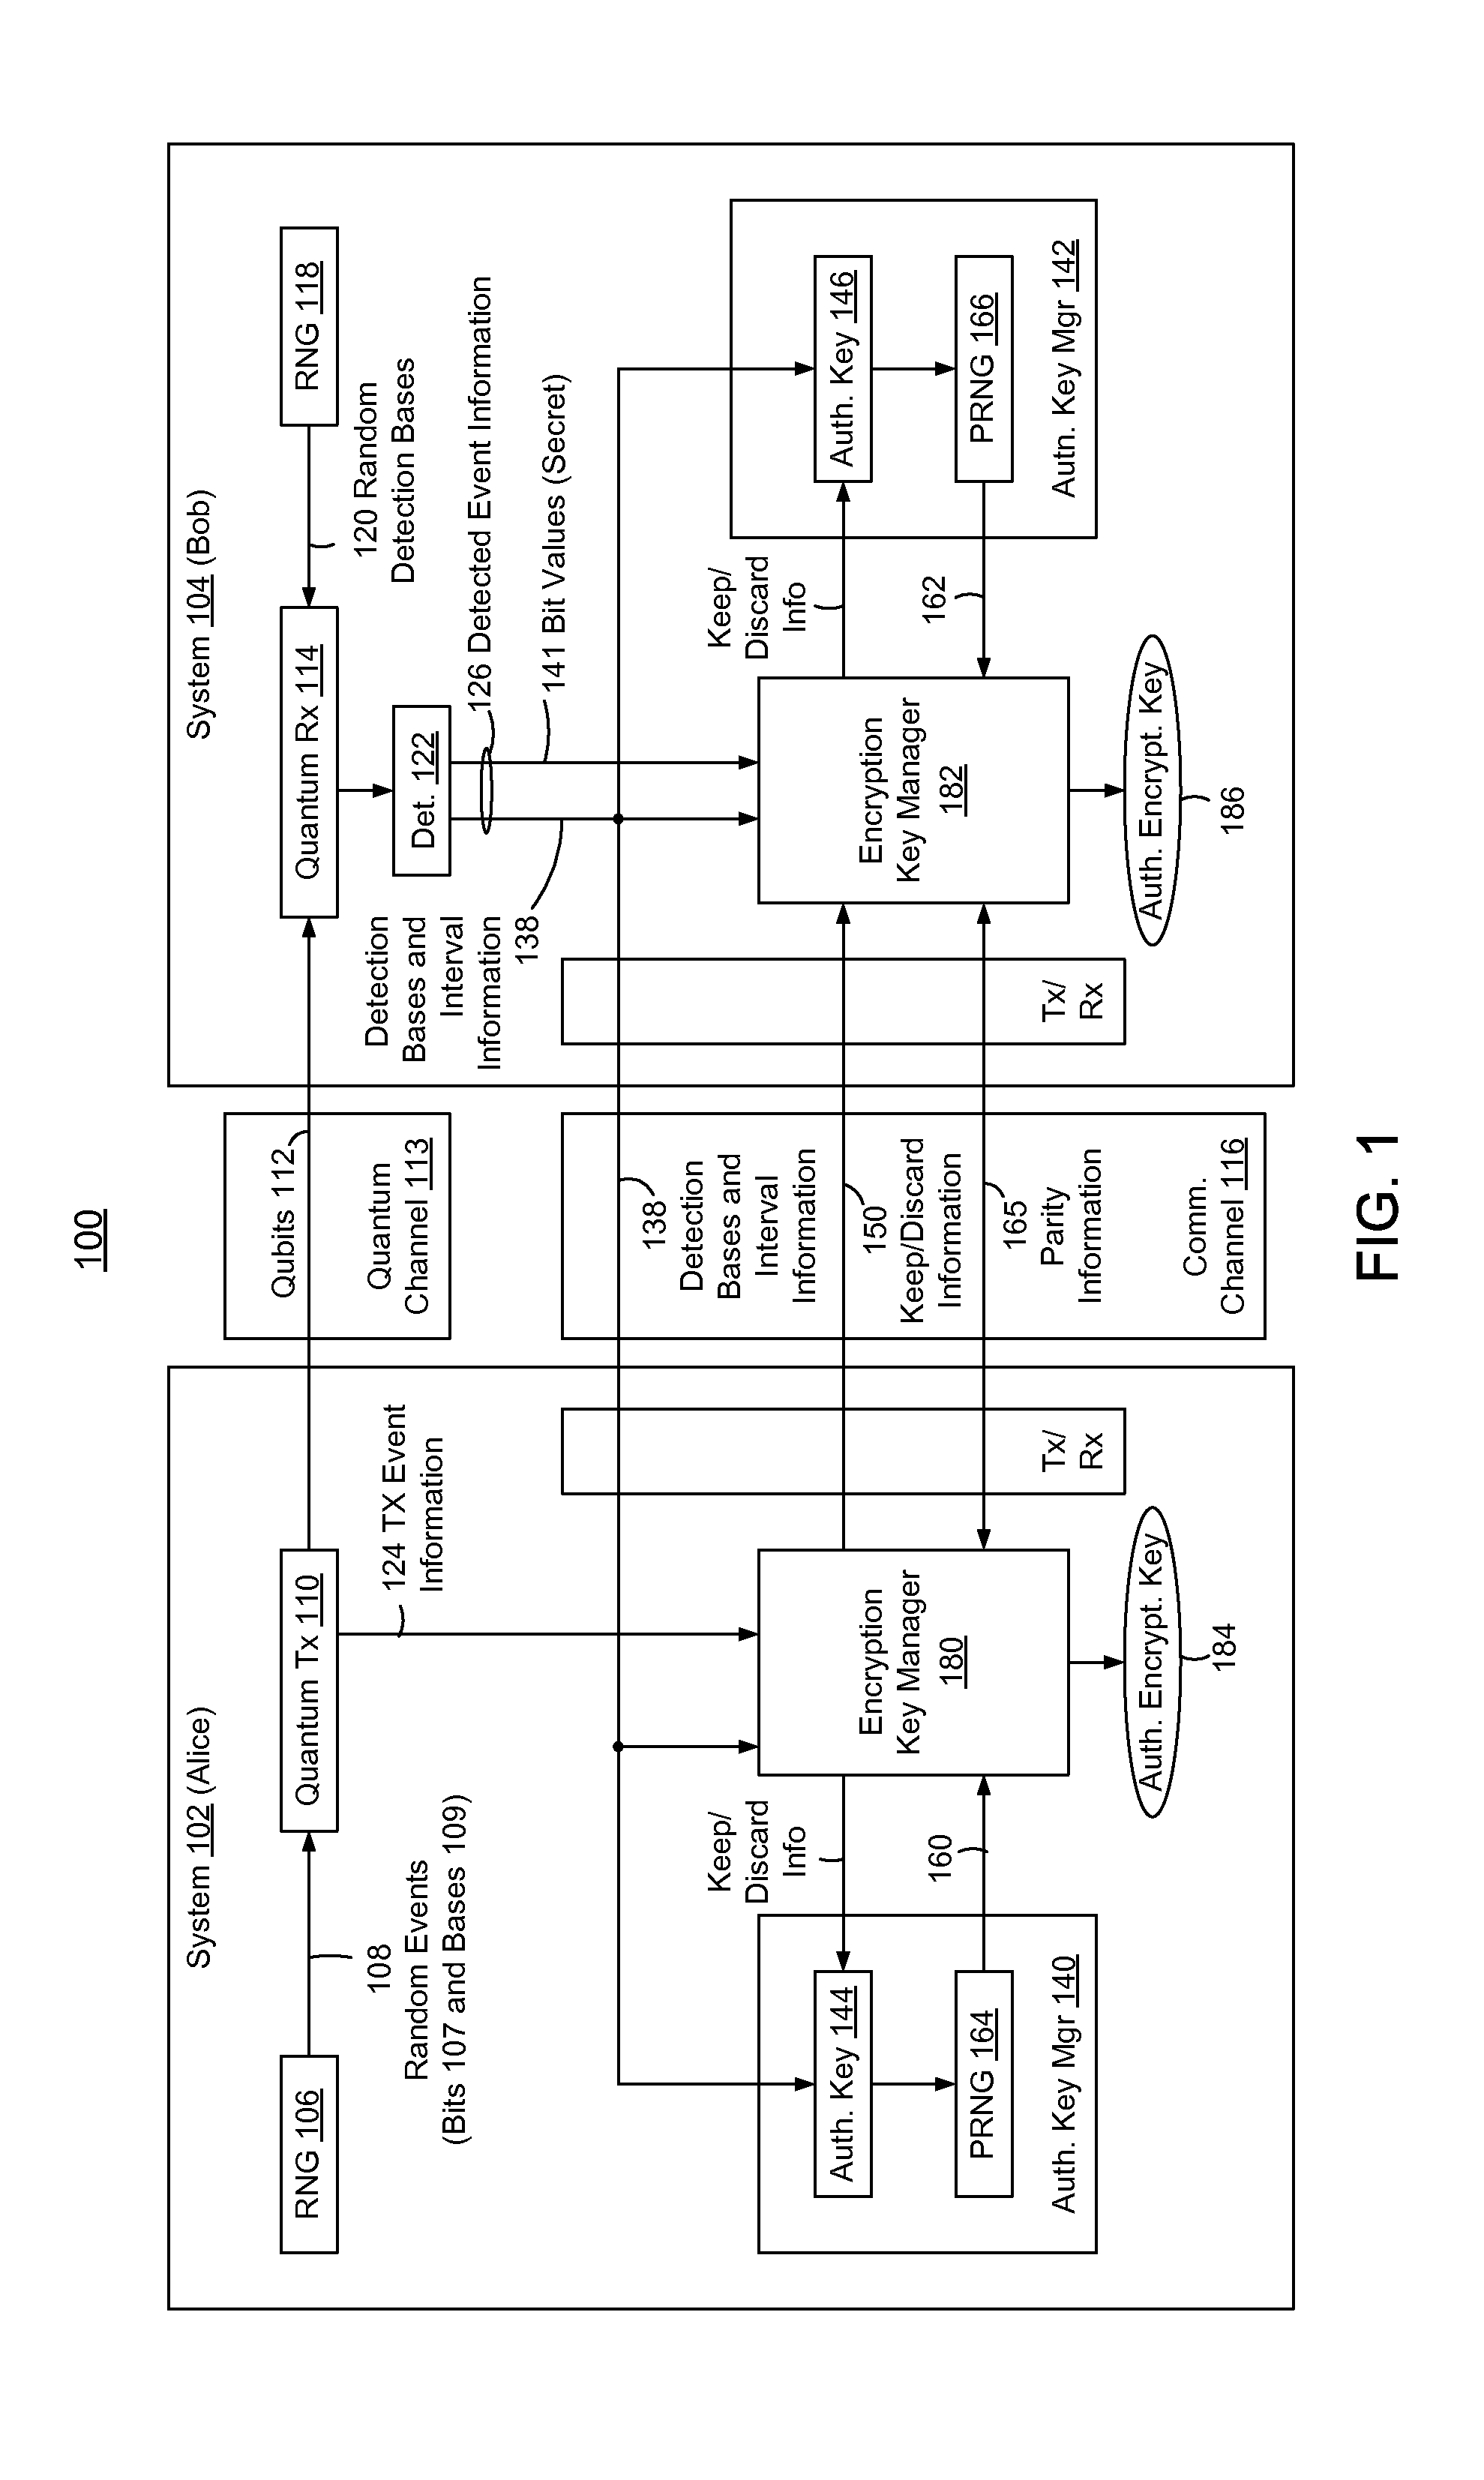 Embedded Authentication Protocol for Quantum Key Distribution Systems